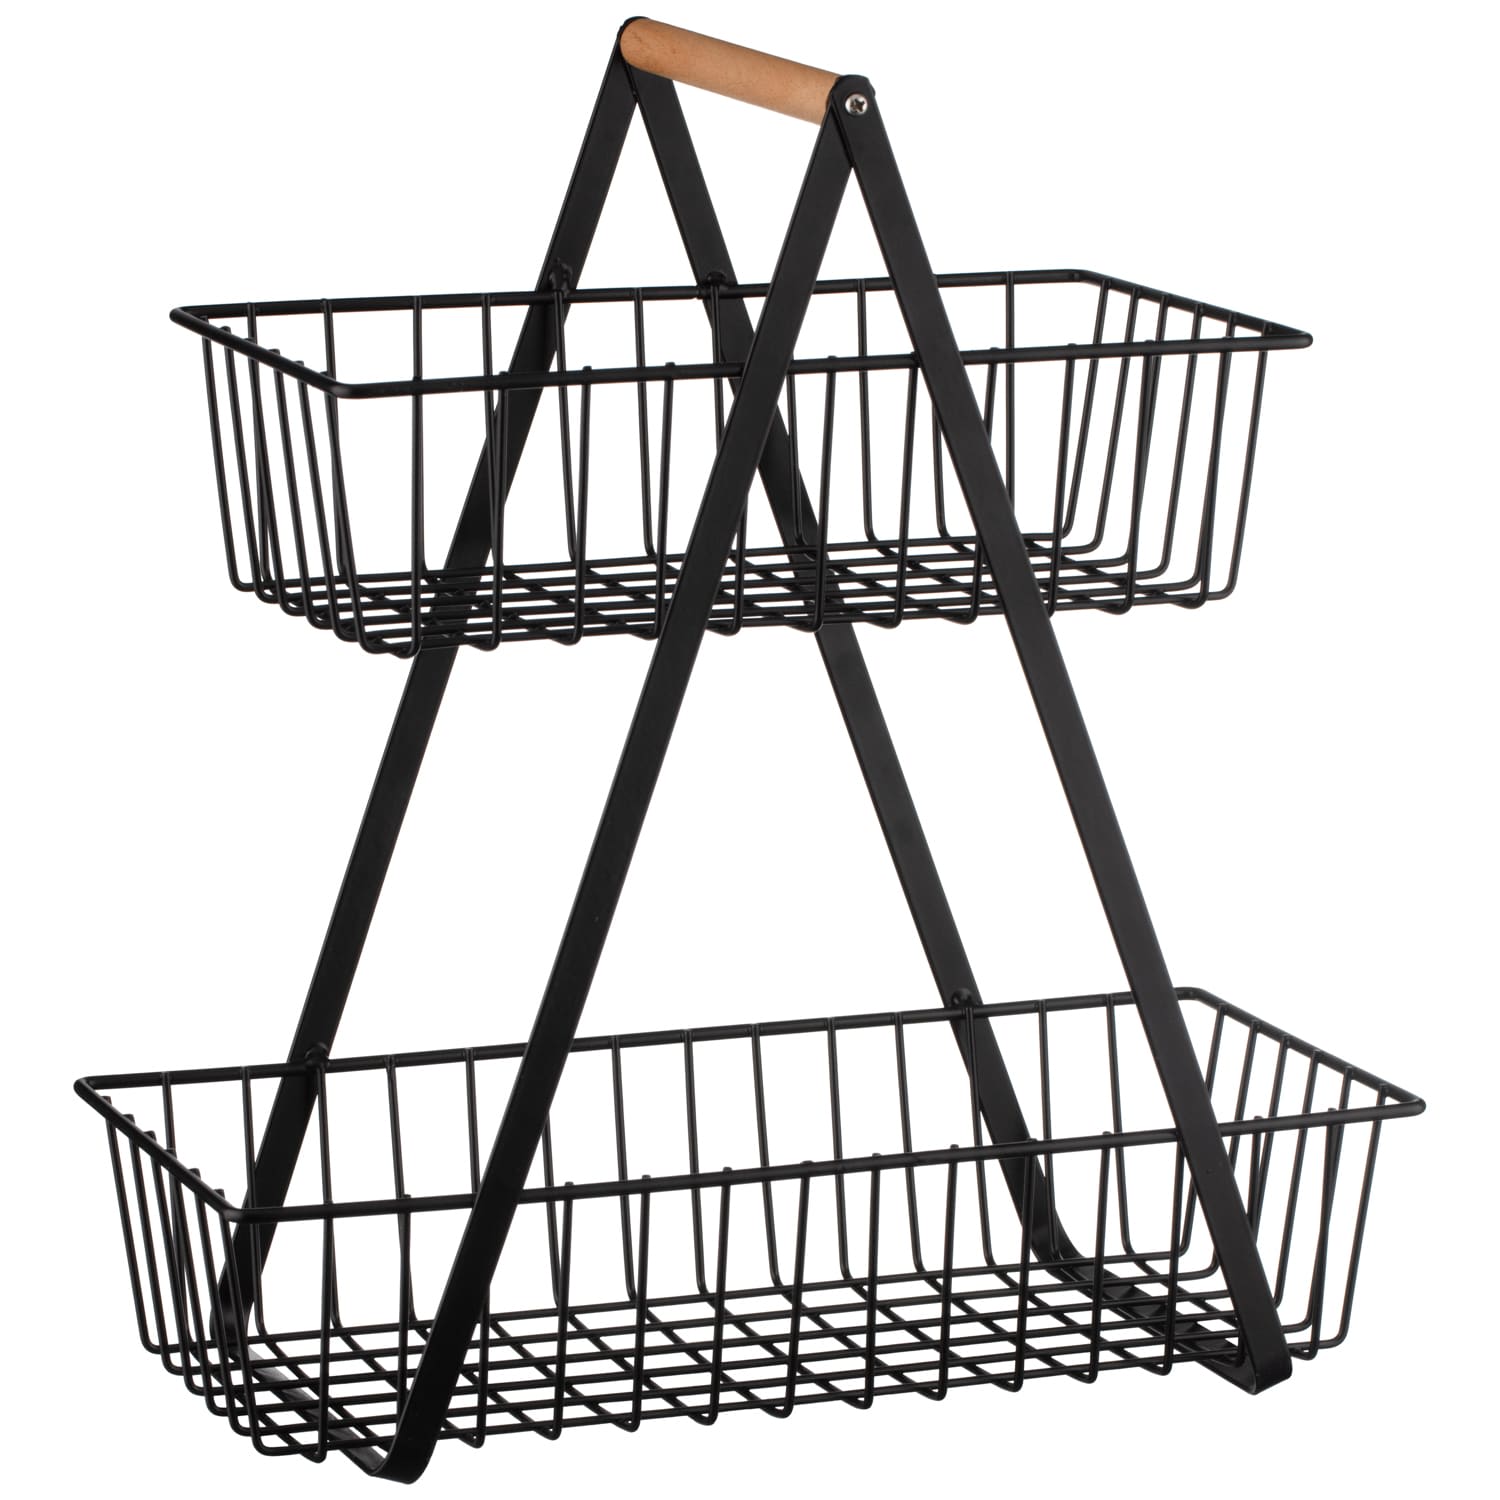 Two Tier Storage Basket with Wooden Handle